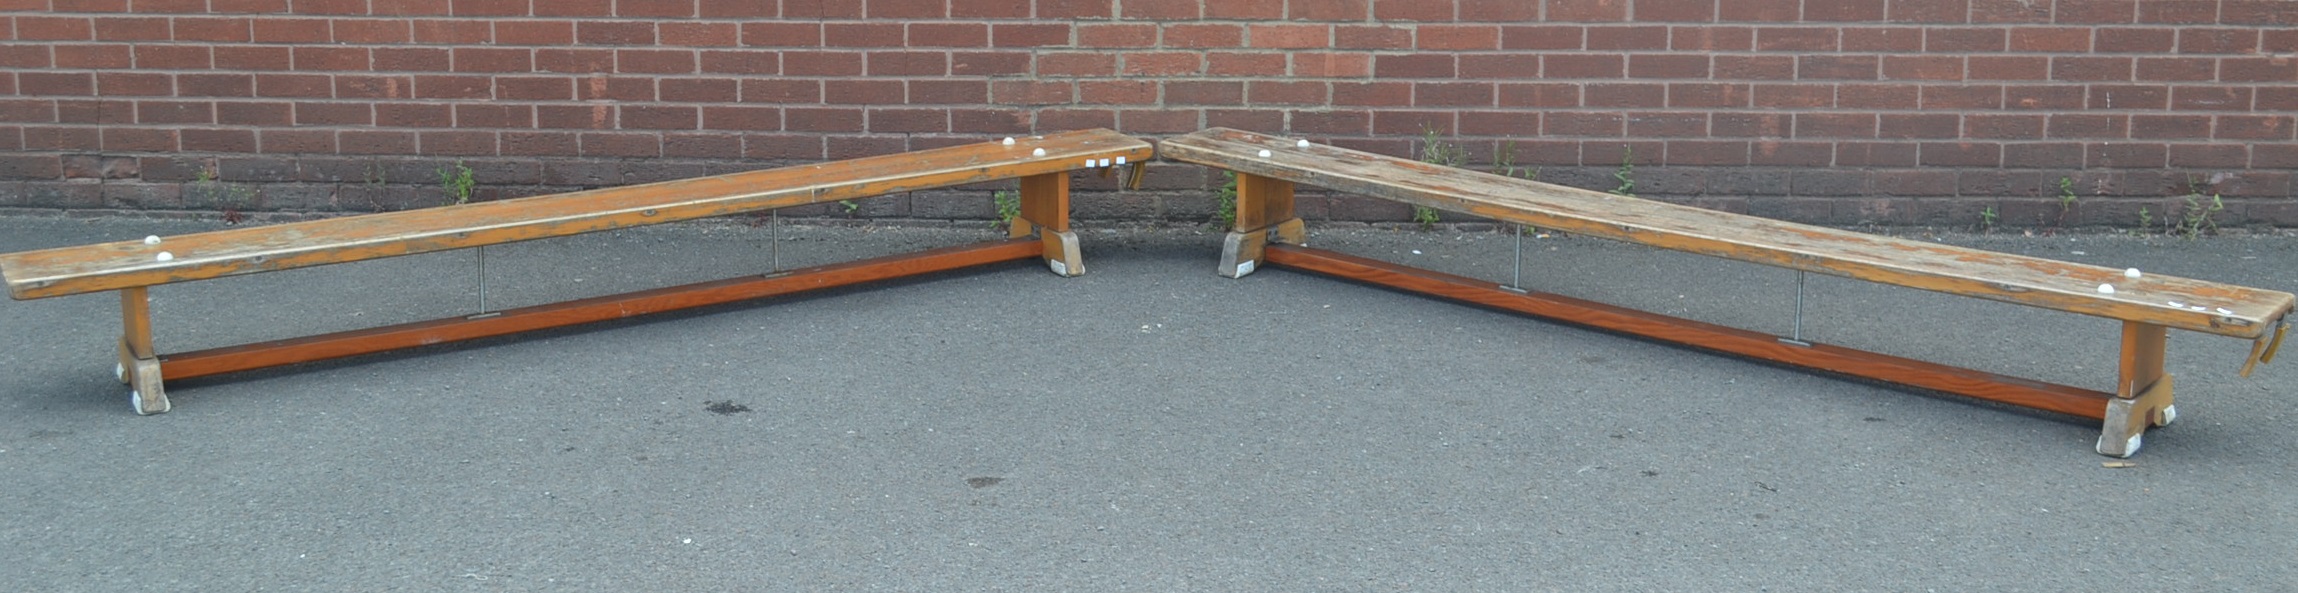 A pair of Niels Larsen gym benches 263cm long